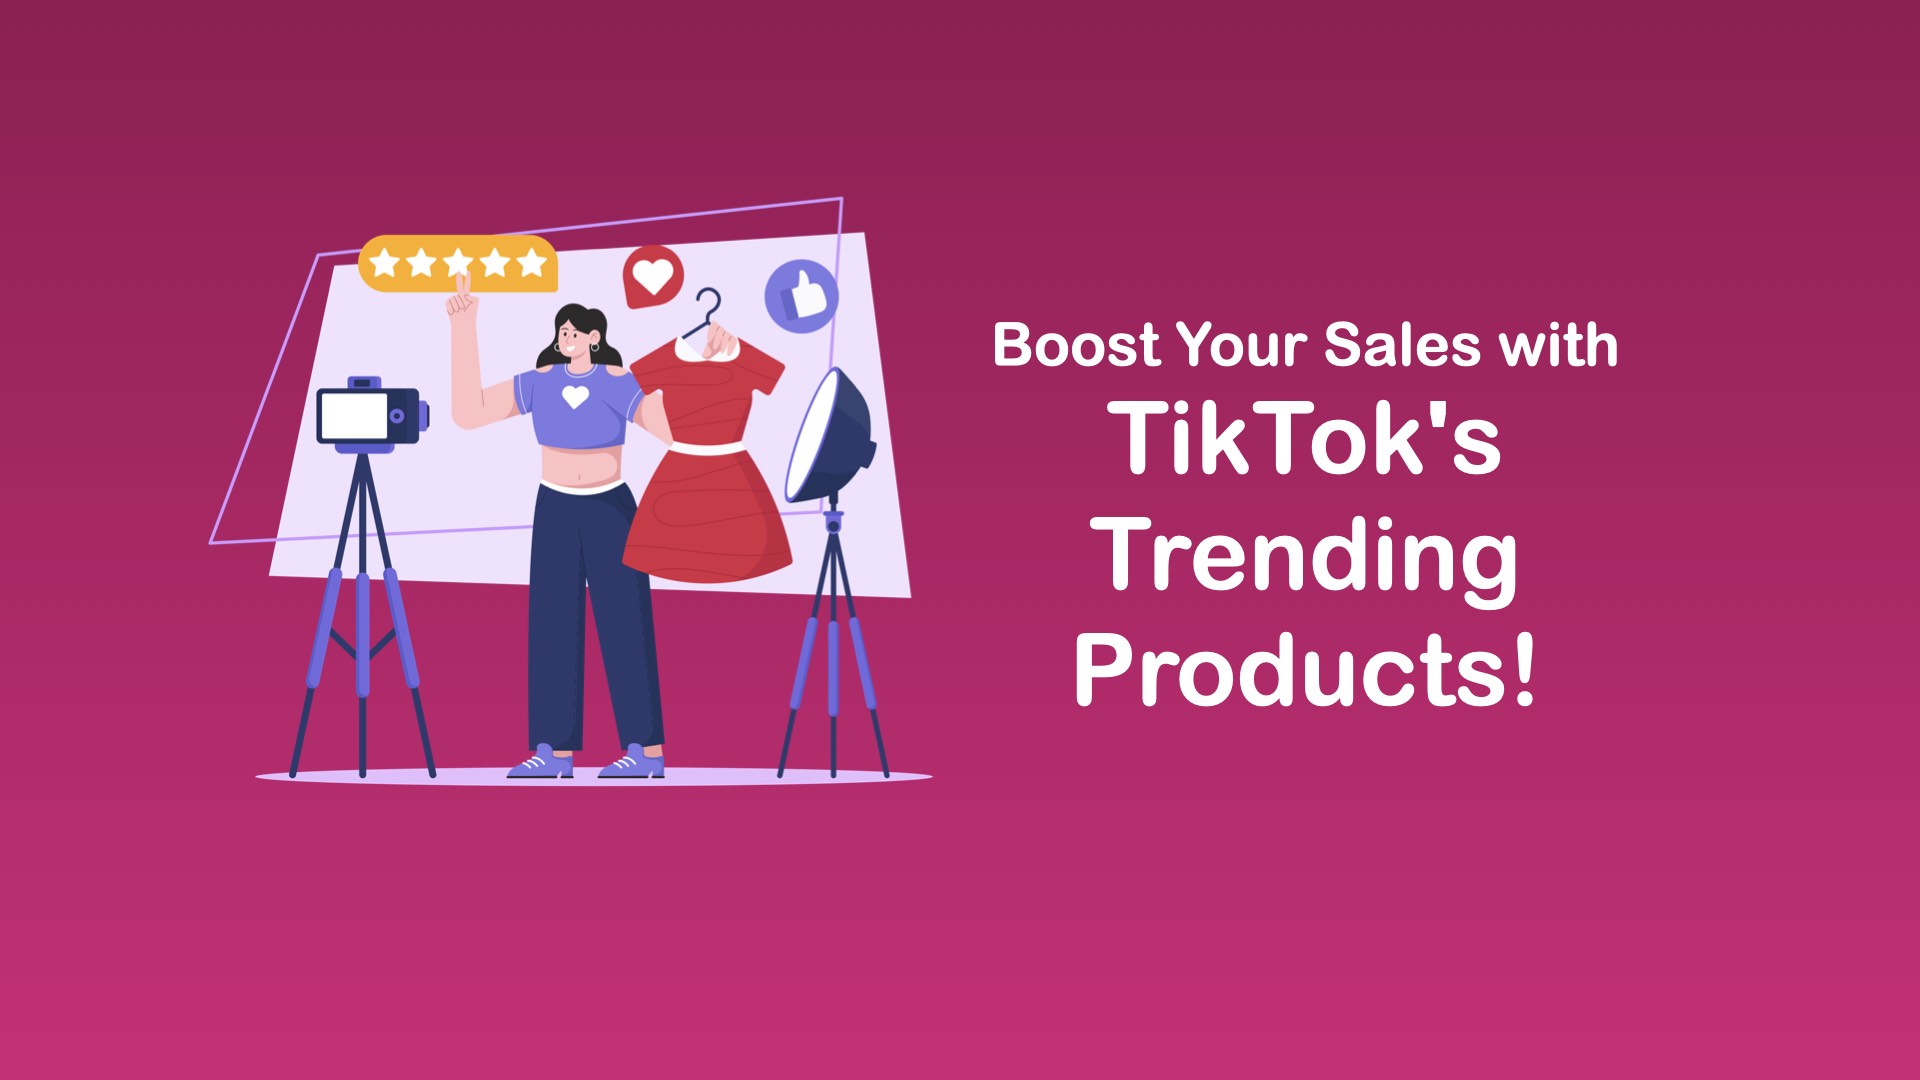 Boosting Sales on TikTok: Products Trending in Malaysia